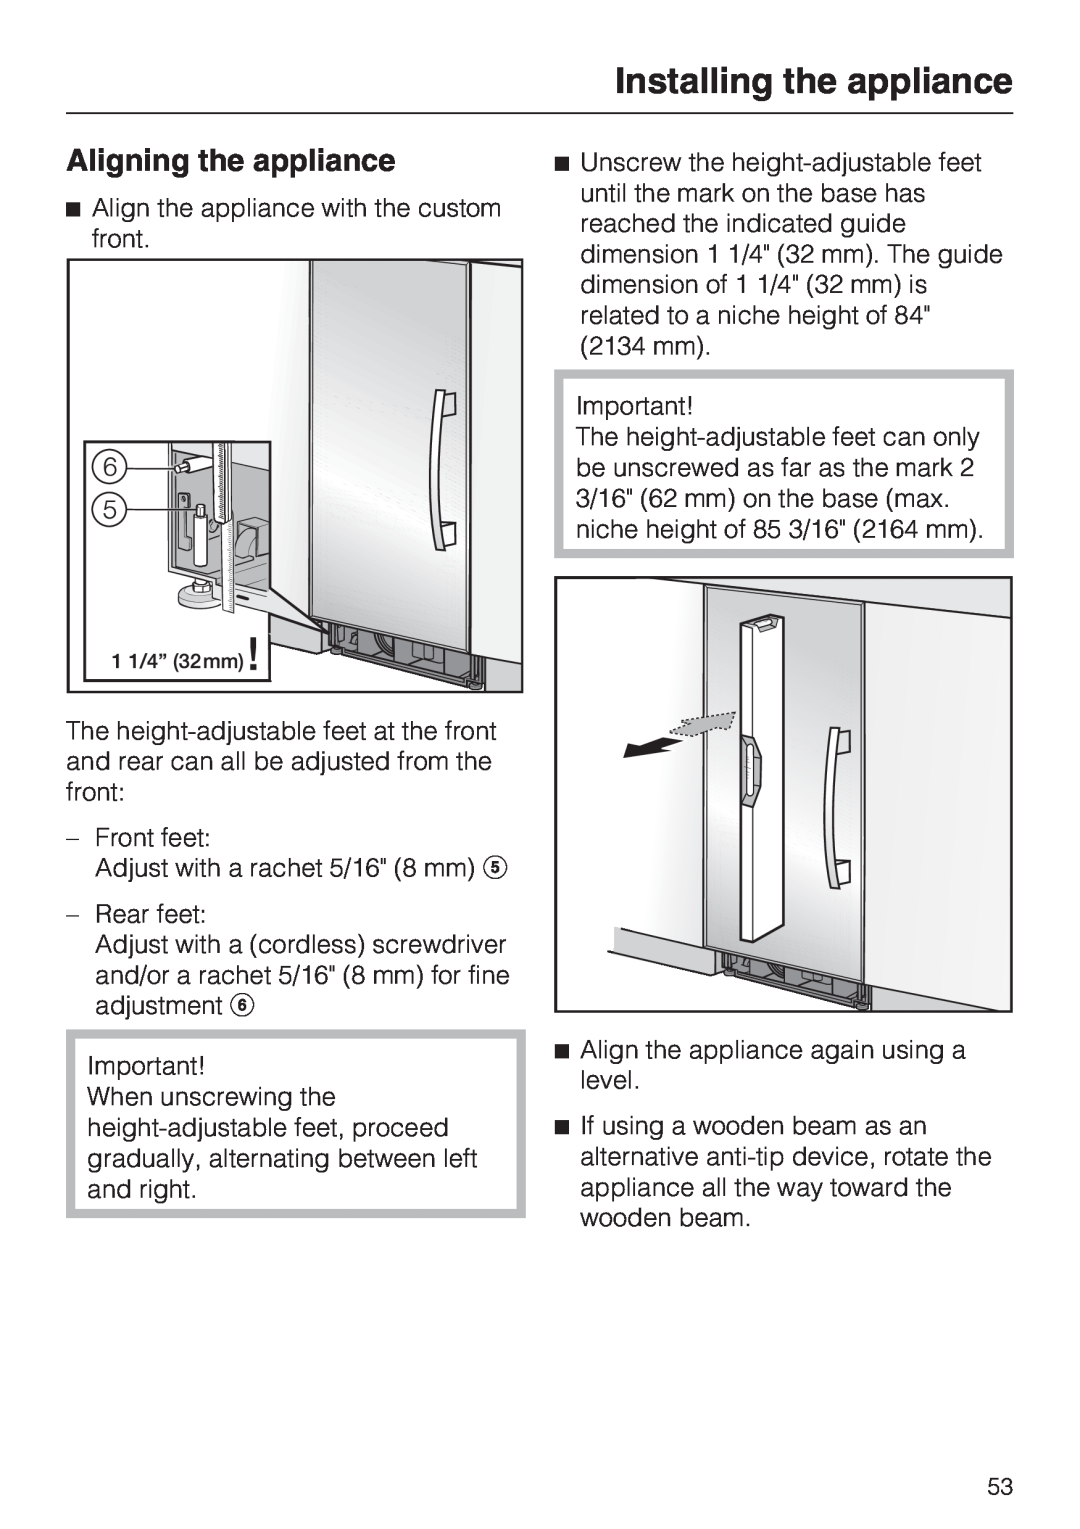 Miele K 1801 SF, K 1911 SF, K 1901 SF, K 1811 SF installation instructions Aligning the appliance, Installing the appliance 